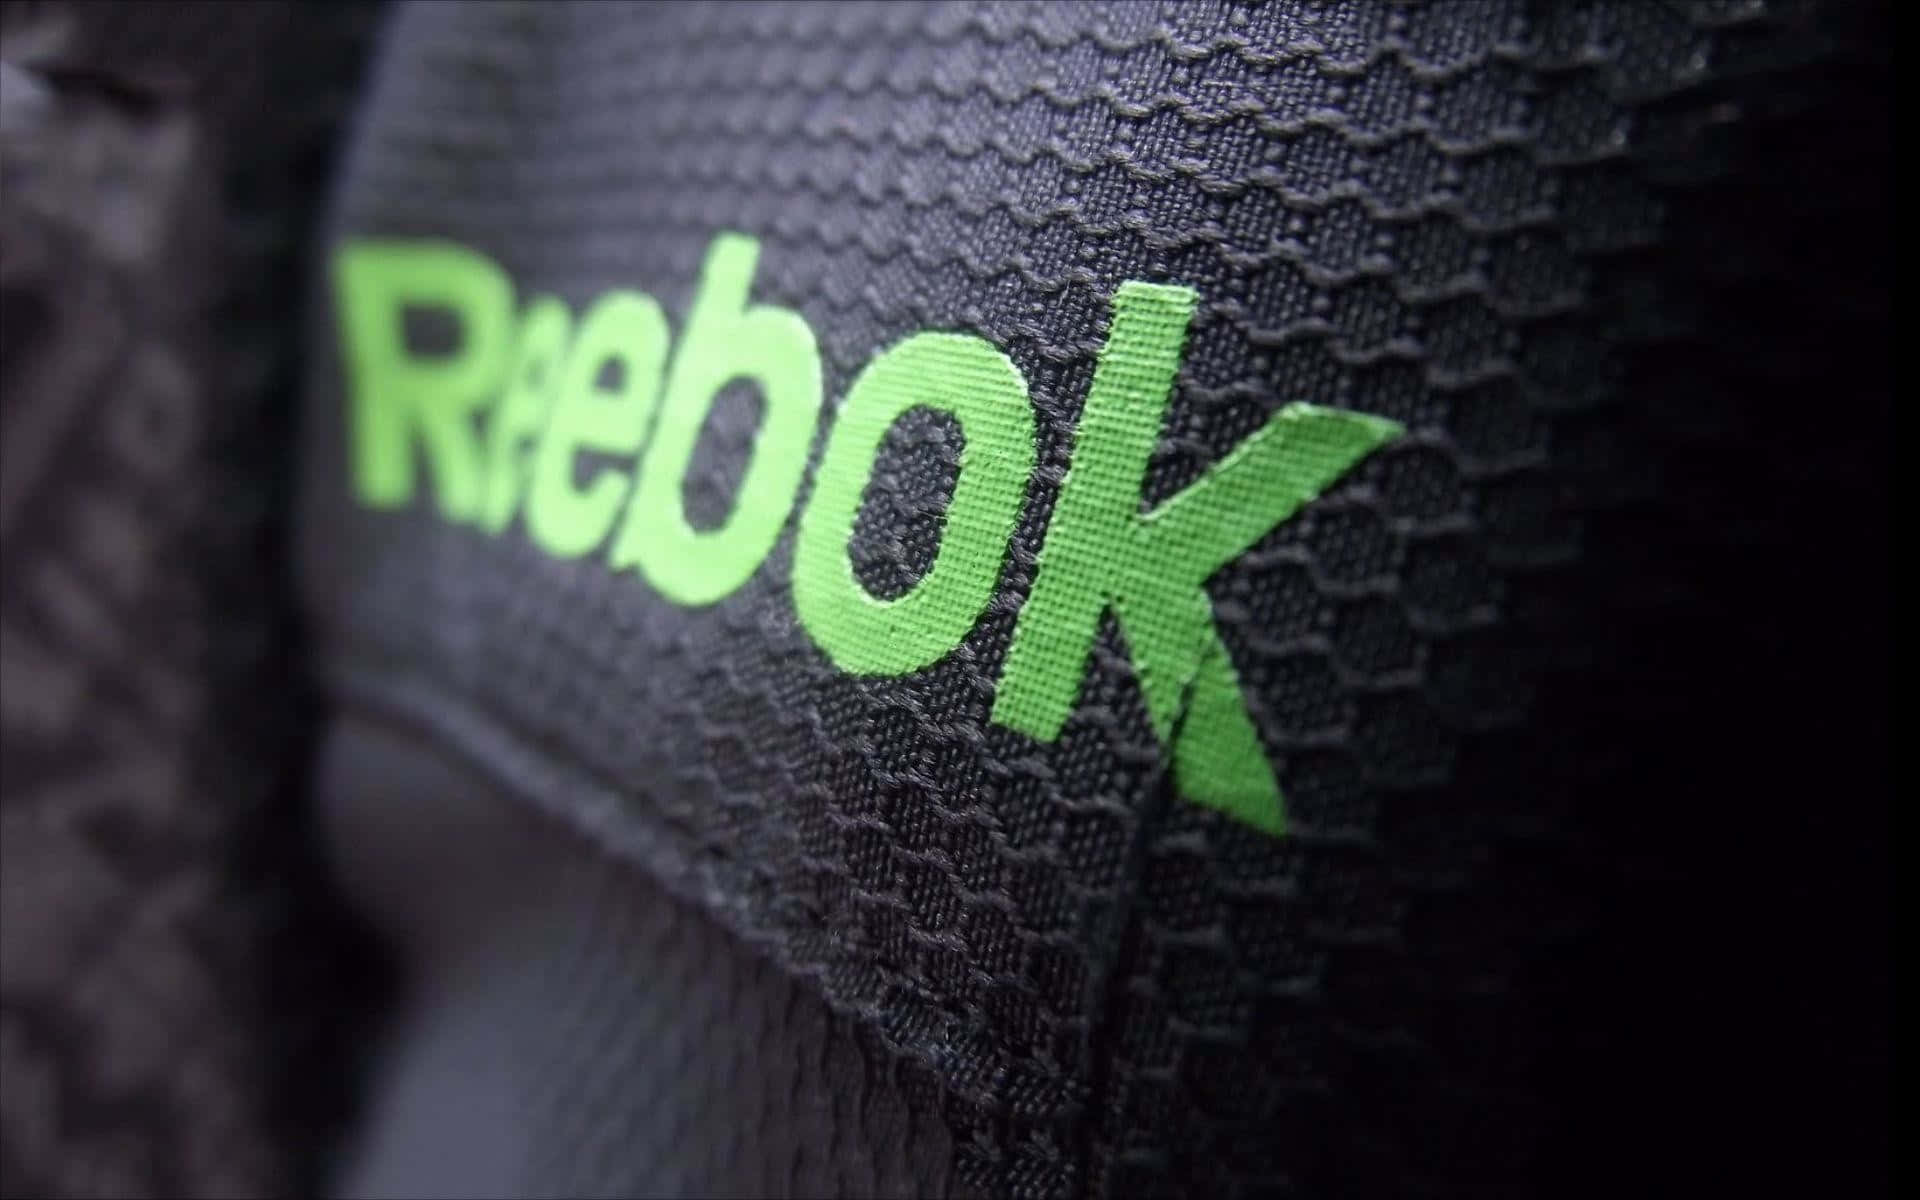 Step into Reebok and find yourself ready to take on the world